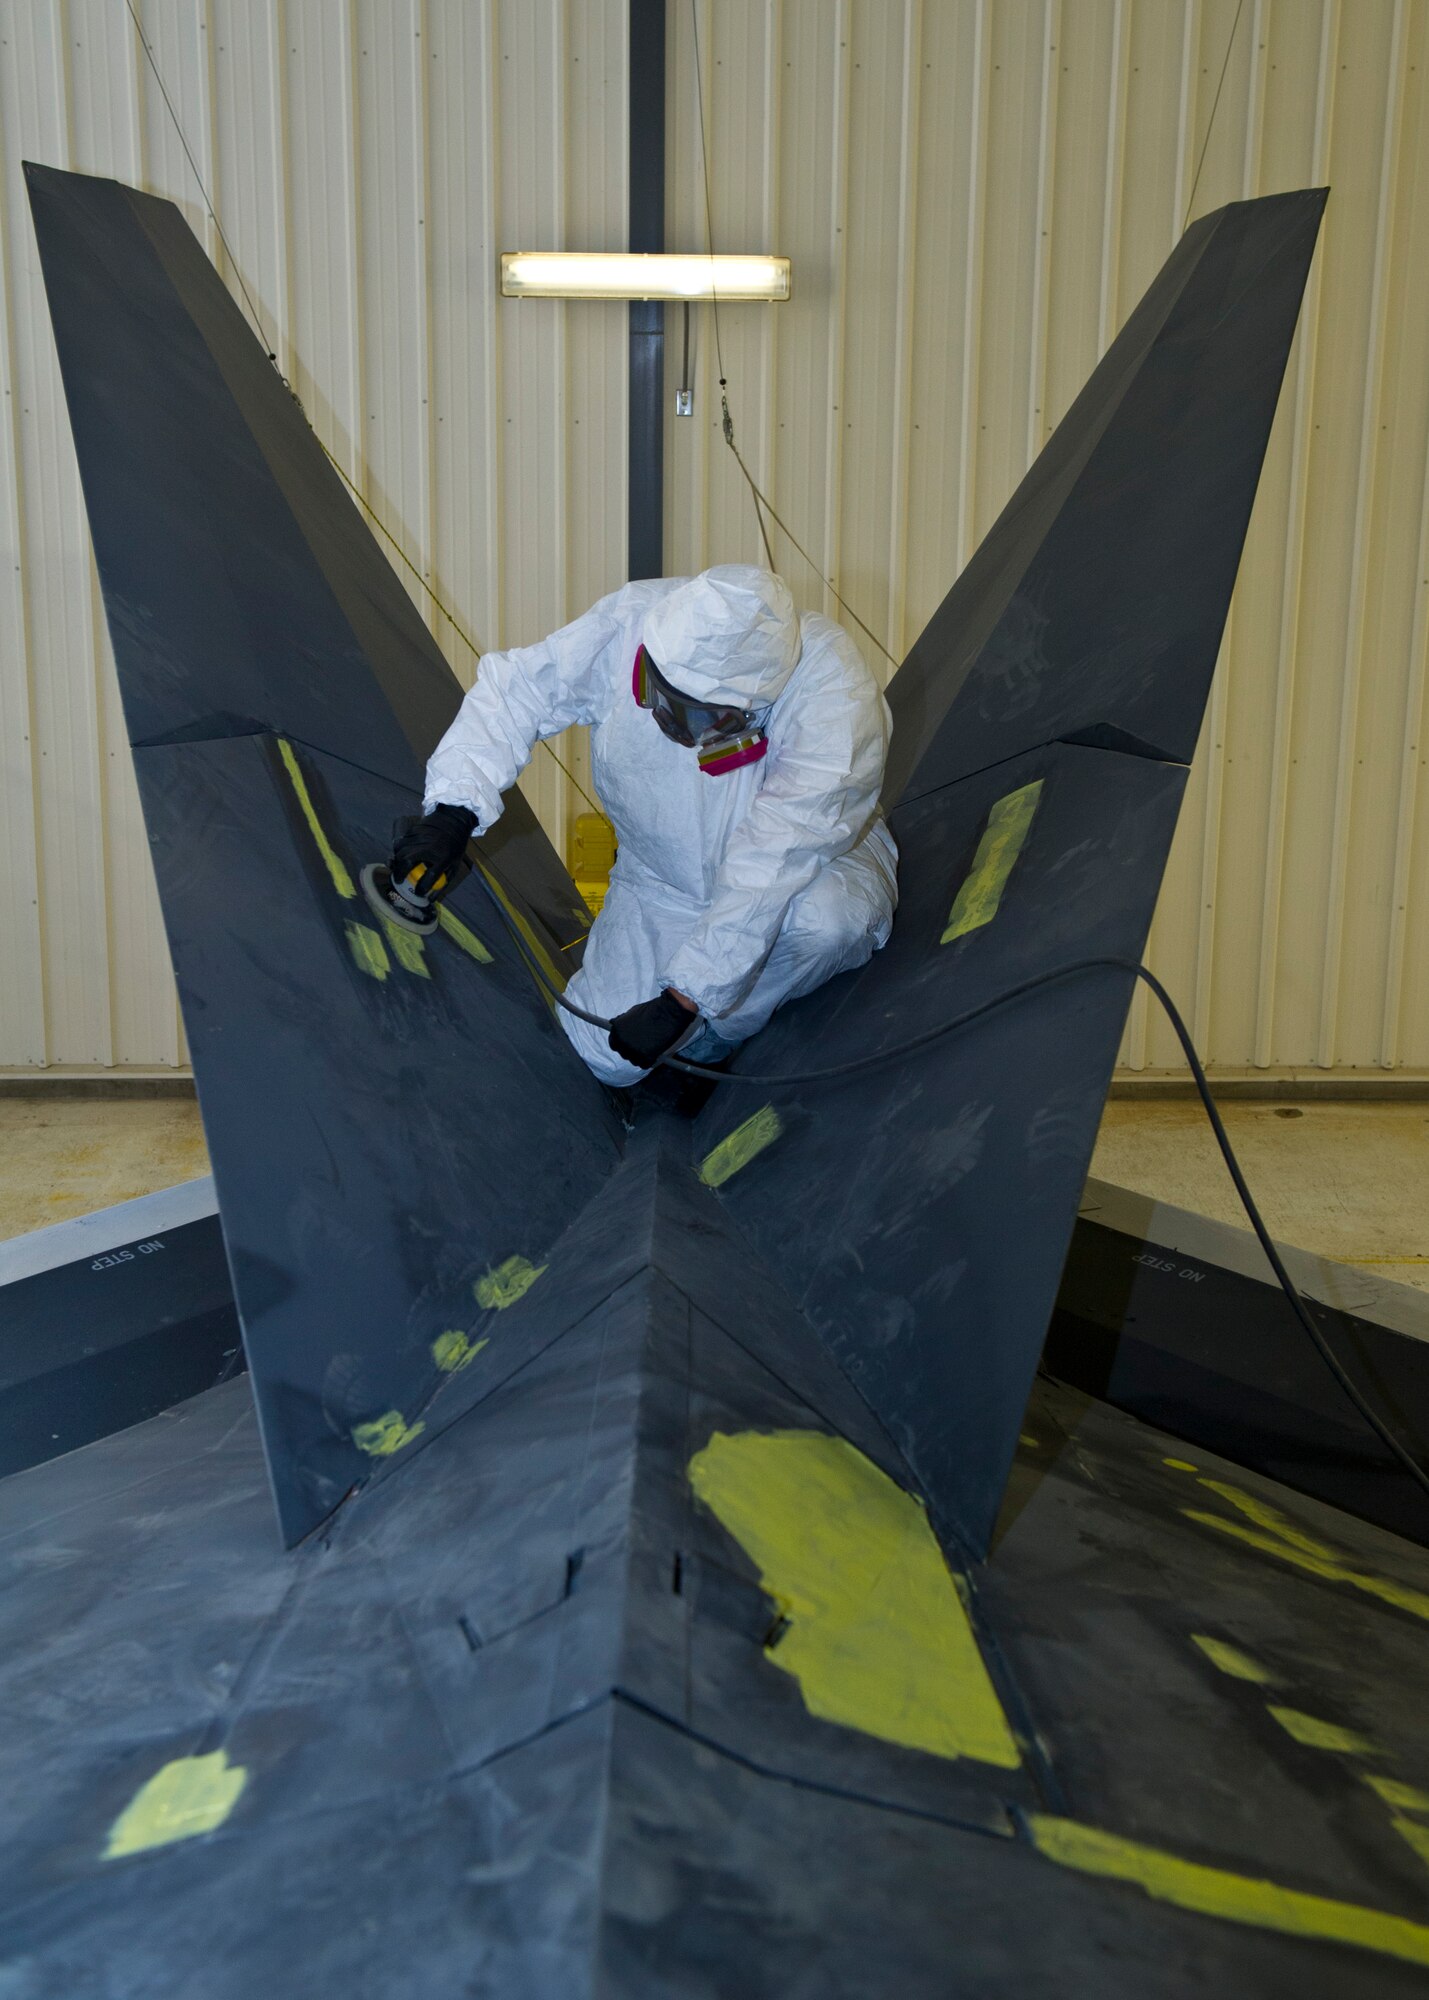 Senior Airman Trevor Mendez from the 49th Maintenance Squadron, fabrication flight sands the tail of the F-117 at Holloman Air Force Base, N.M., March 13. The F-117 has been on static display in Holloman’s Heritage Park since its retirement in 2008. Due to sun and inclement weather damage, the 49 MXS removed and towed the aircraft to the hangar to begin the restoration process. Airmen will perform structural maintenance on the Nighthawk and give the aircraft a fresh paint job before returning it for display in Heritage Park. (U.S. Air Force photo by Airman 1st Class Leah Ferrante/Released)